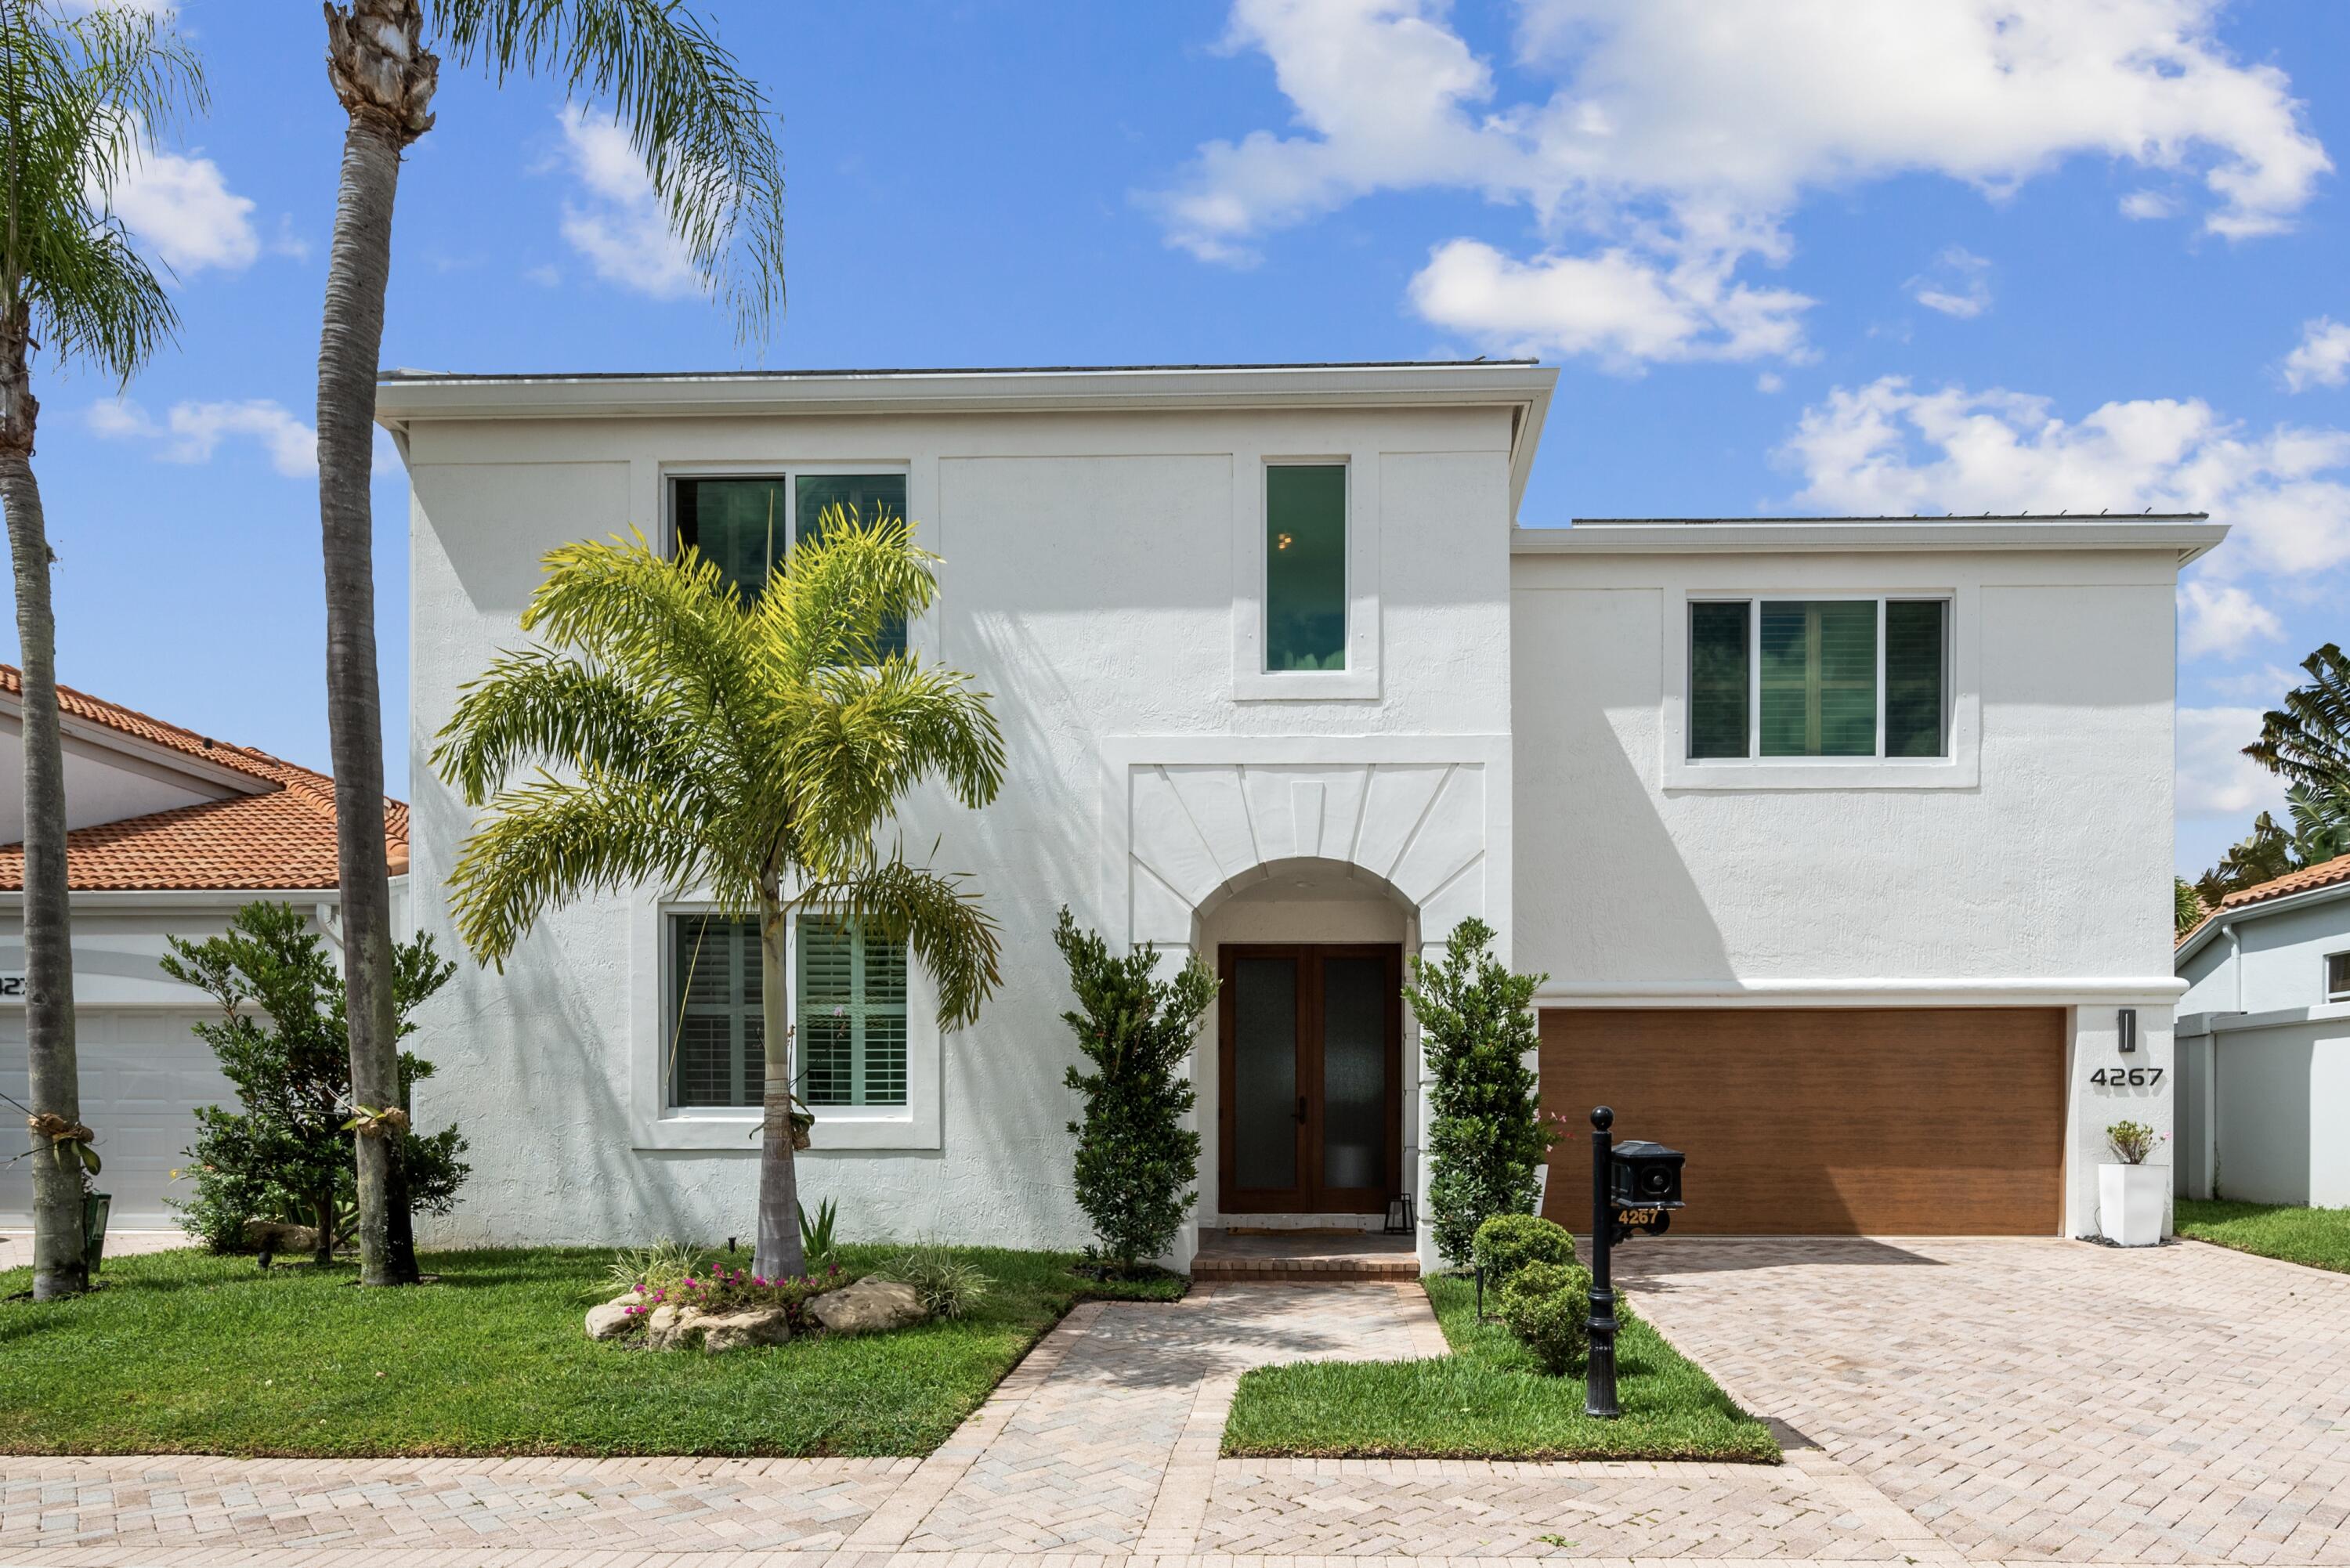 4267 Nw 65th Place, Boca Raton, Palm Beach County, Florida - 4 Bedrooms  
4 Bathrooms - 